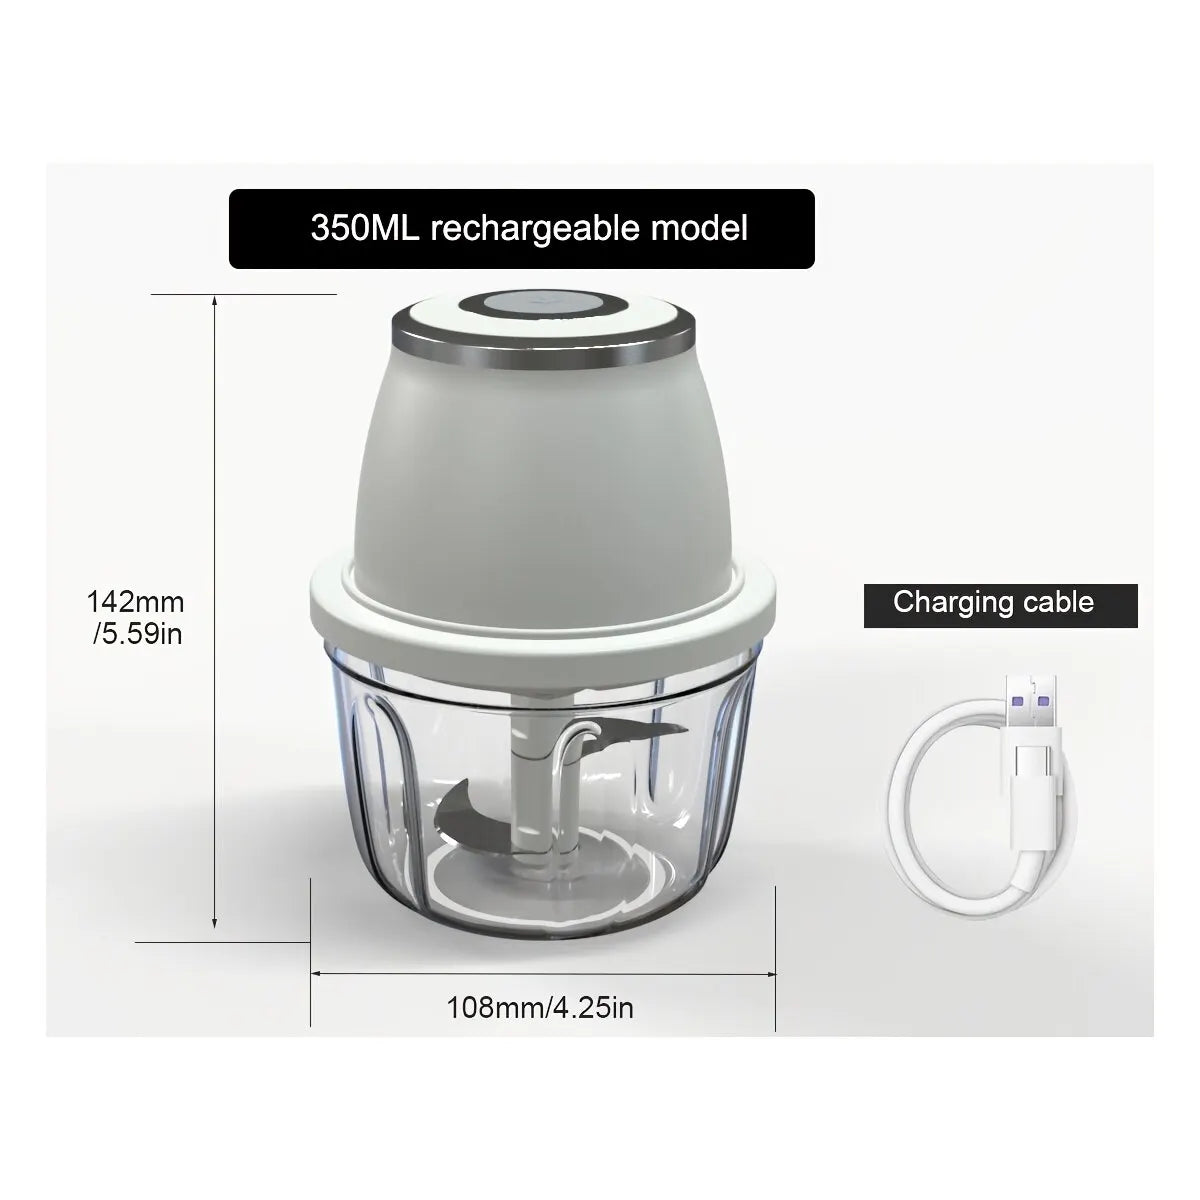 Portable Wireless 304 Stainless Steel Electric Food Chopper & Processor